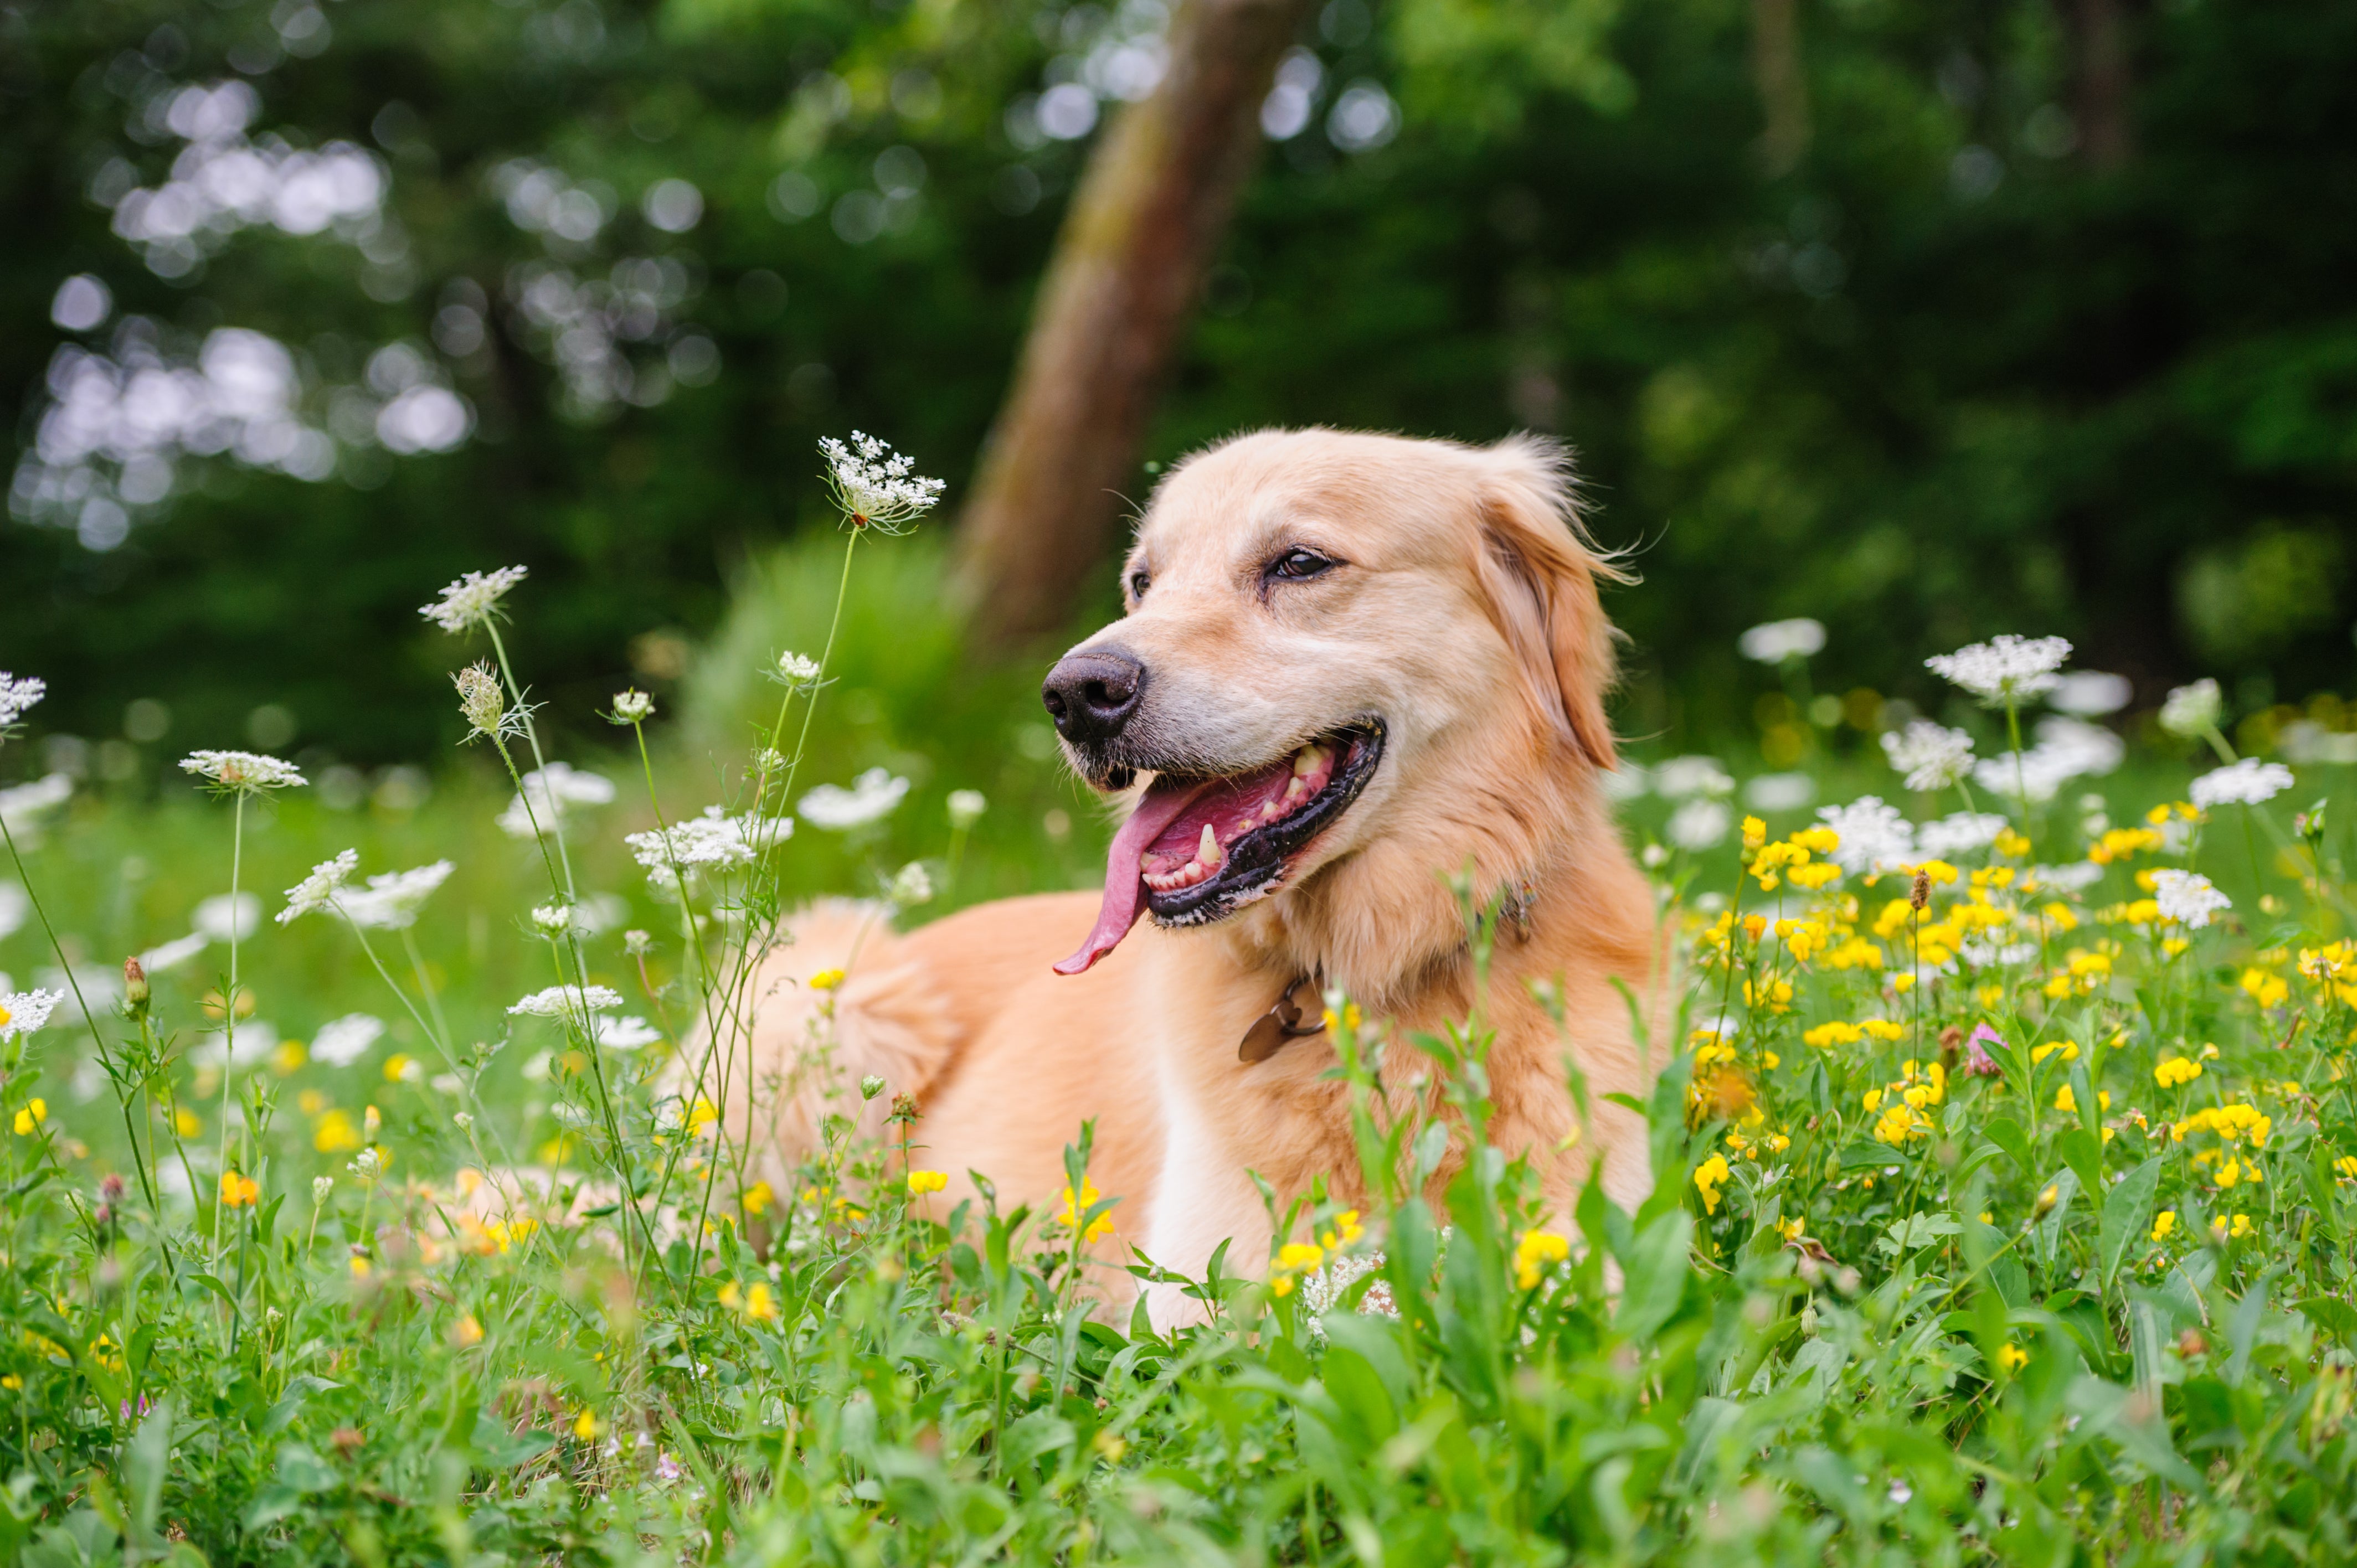 Toxic Plants and Foods: Common Summer Hazards for Dogs